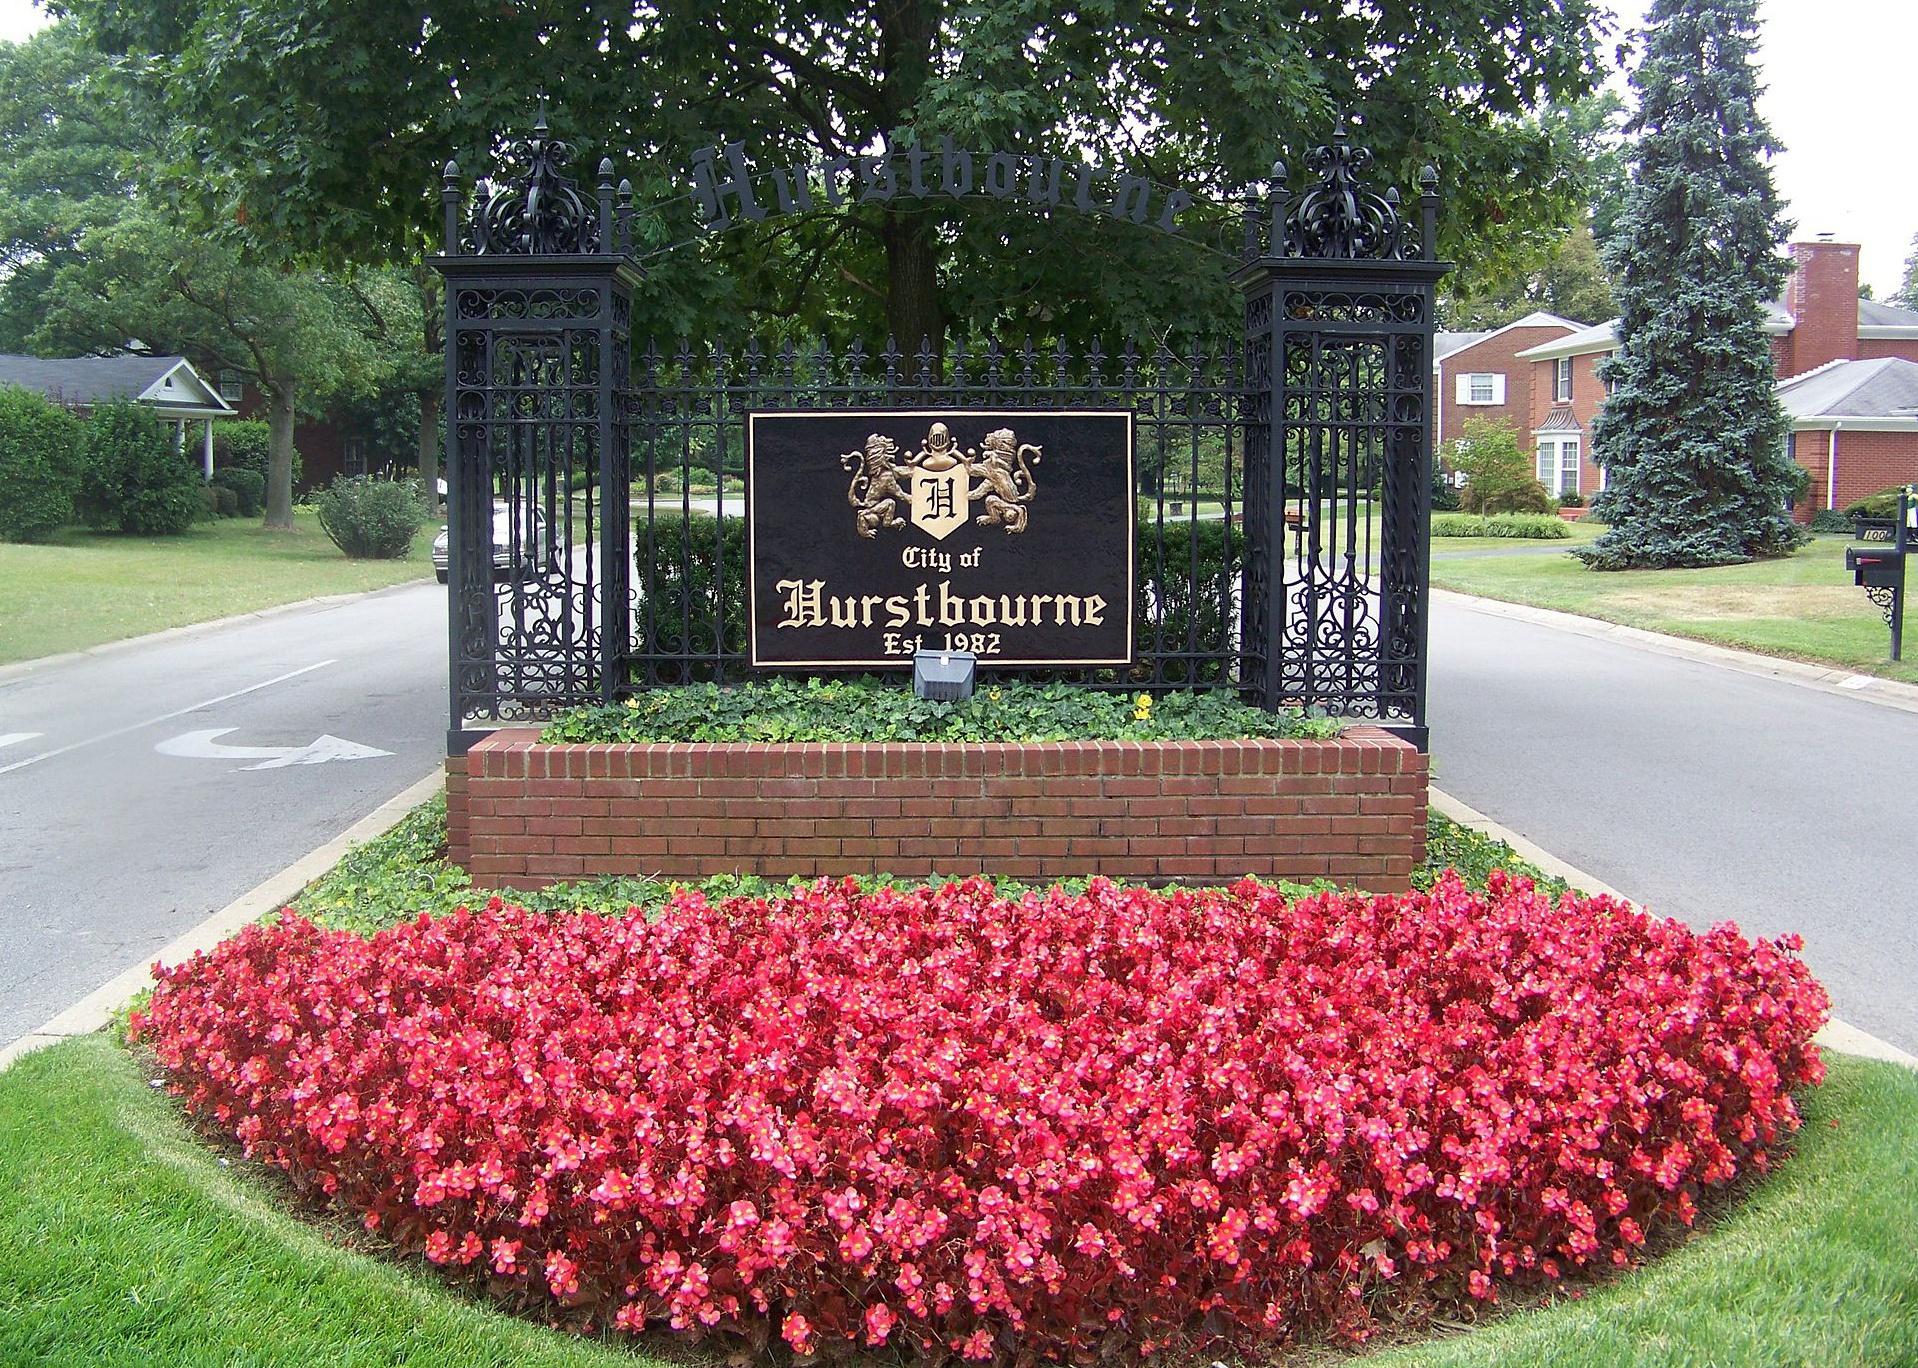 An iron entrance into Hurstbourne with pink flowers in the front.